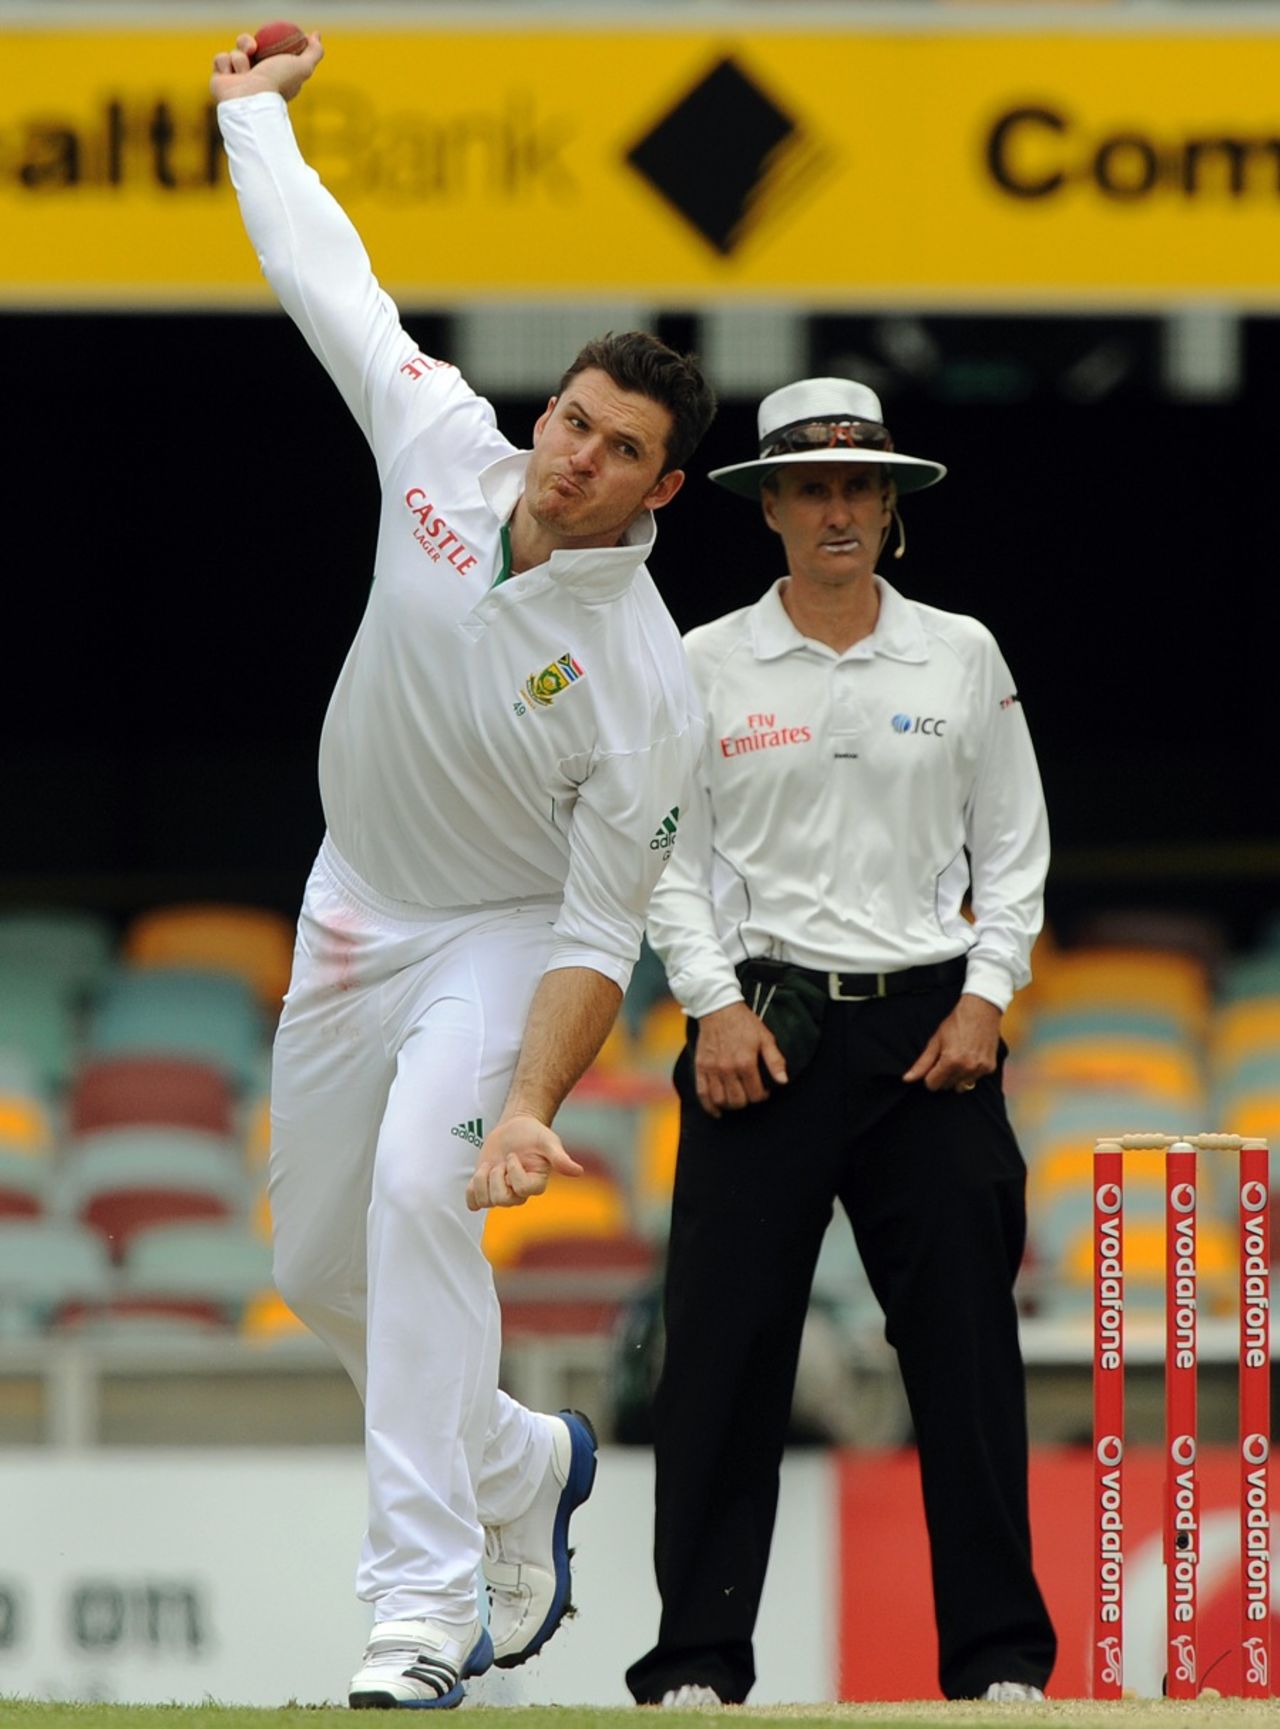 Graeme Smith makes a rare appearance at the bowling crease, Australia v South Africa, first Test, day four, Brisbane, November 12, 2012 